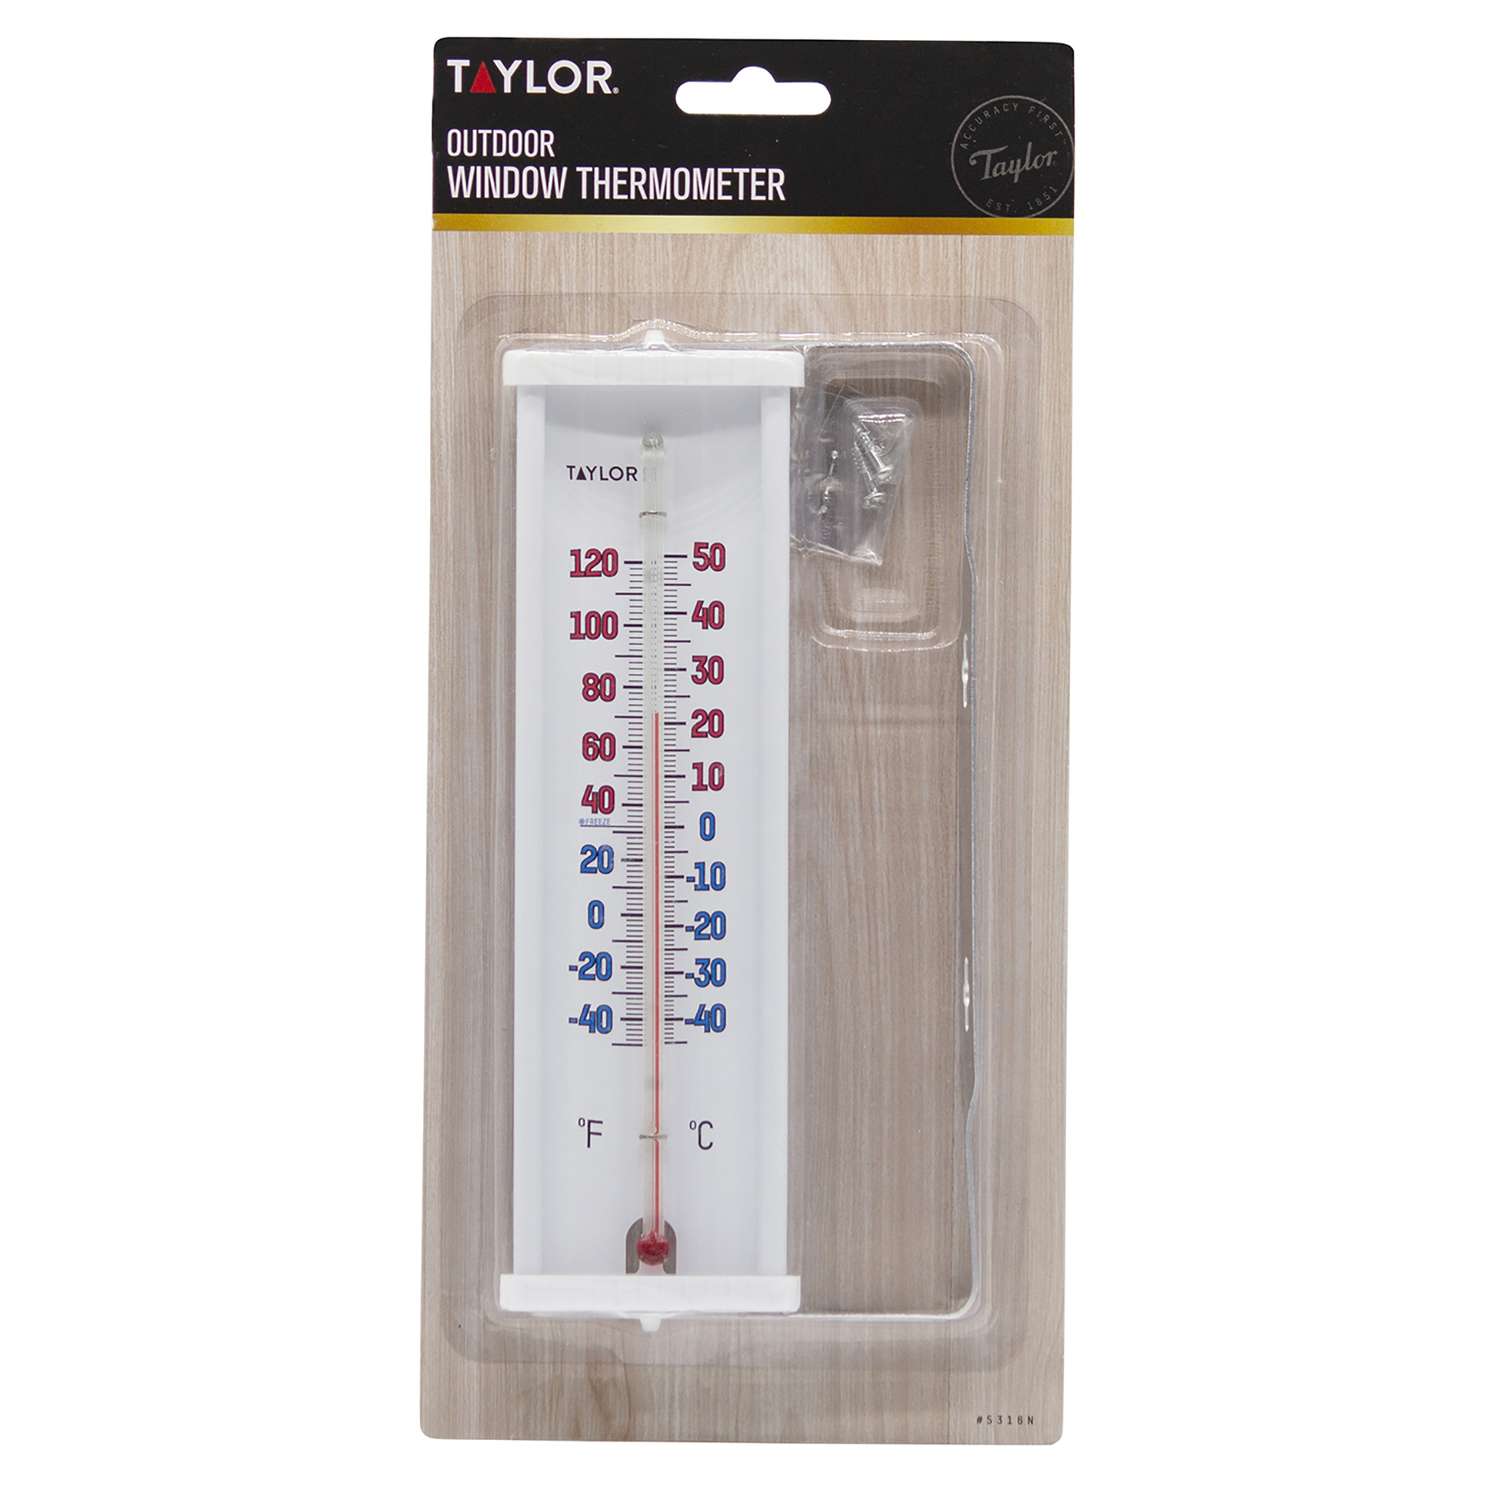 1pc Transparent Dial Window Thermometer With Accurate Reading For Indoor/ Outdoor Use, Battery-Free, Ideal For Home, Office, Patio, Etc.